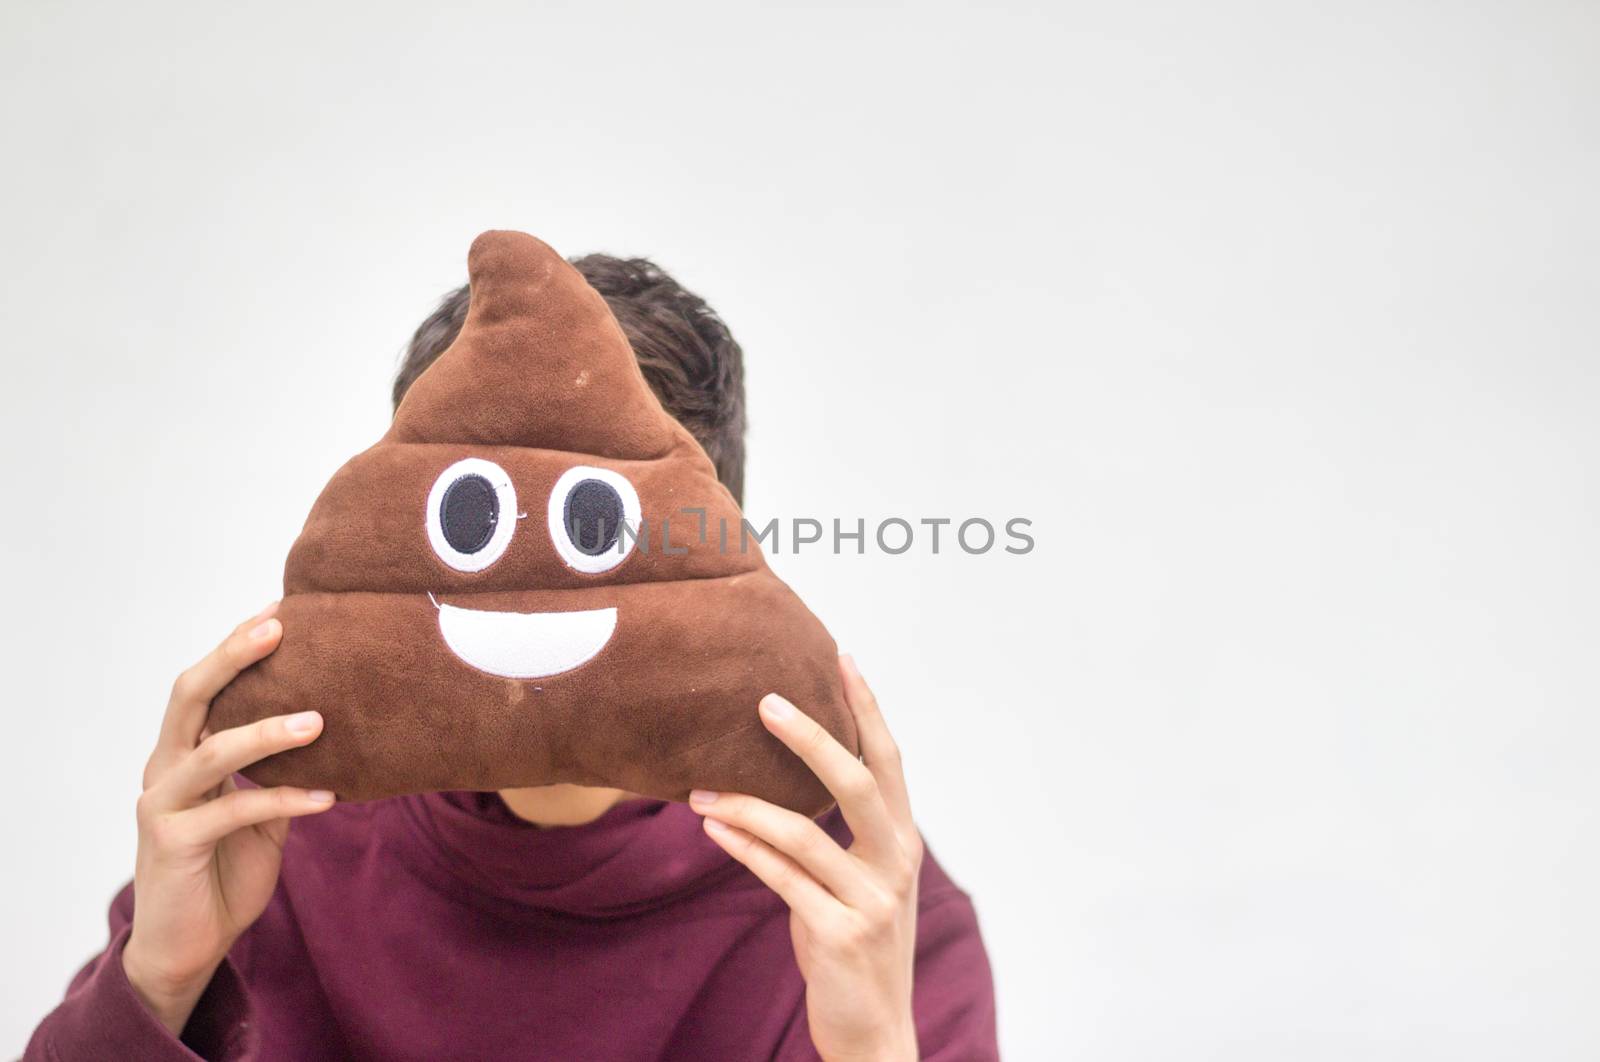 Photograph of a man with poop emoji cushion